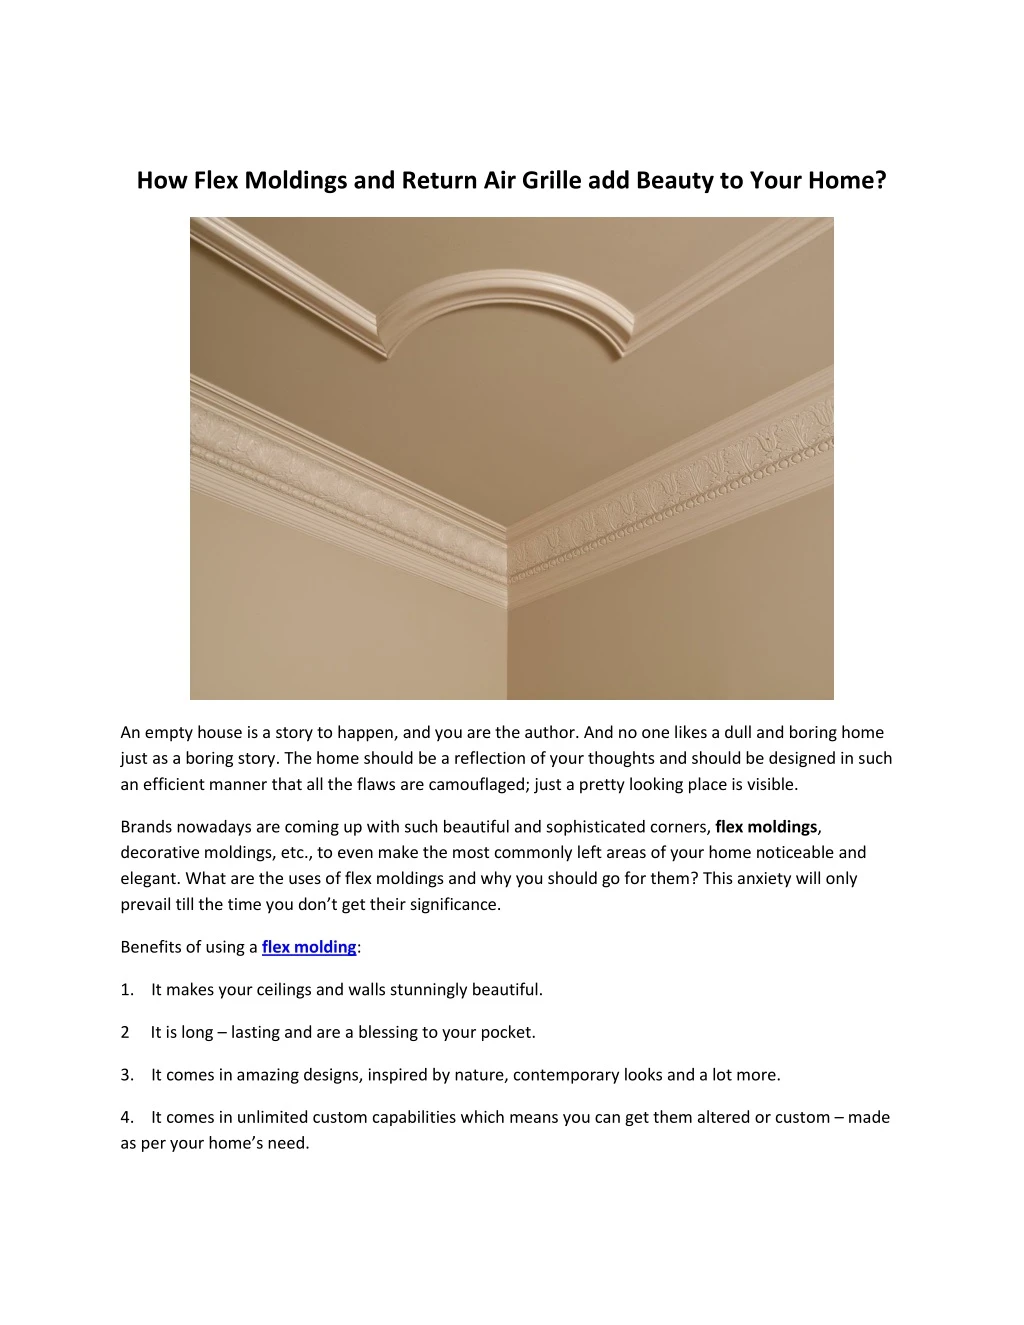 how flex moldings and return air grille